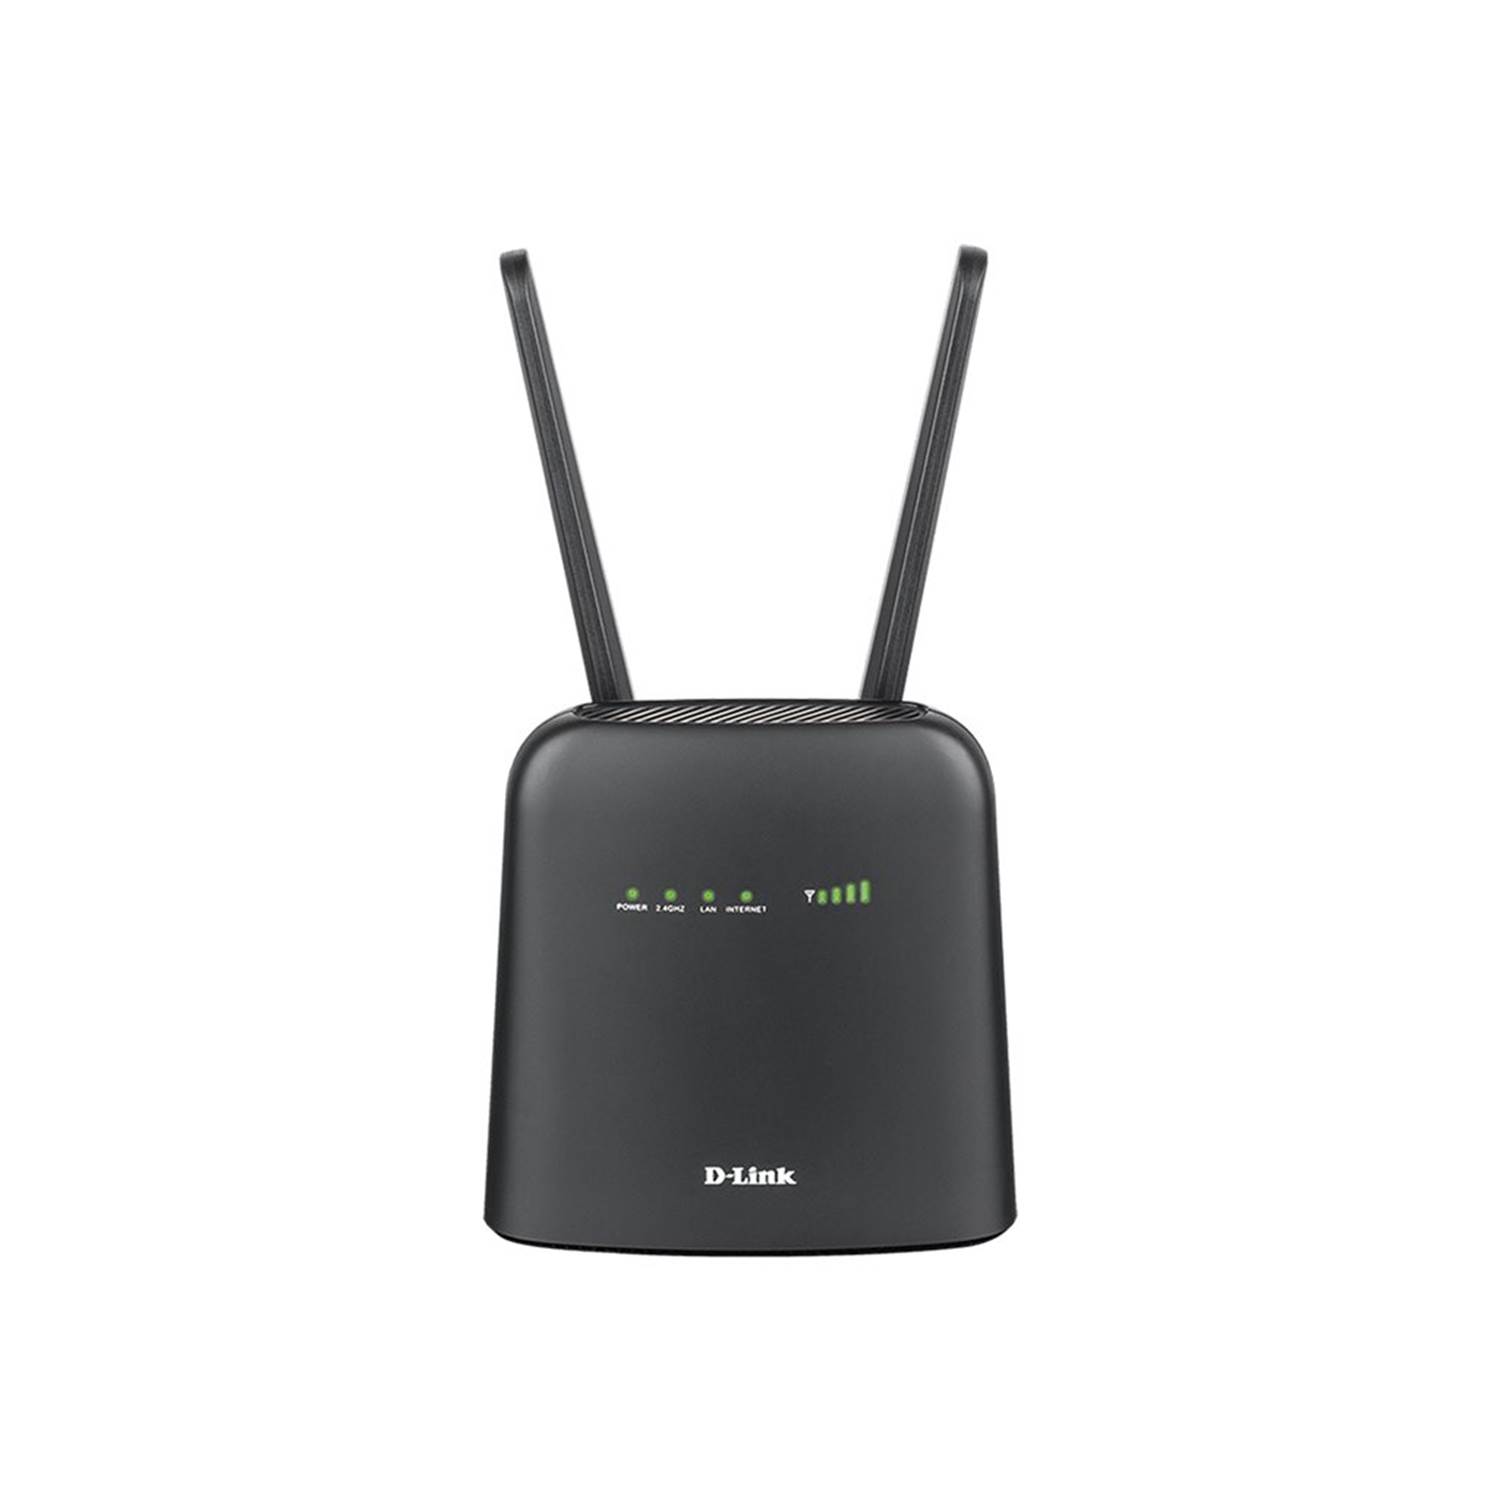 D-Link Wireless N300 4G LTE Router - DWR-920